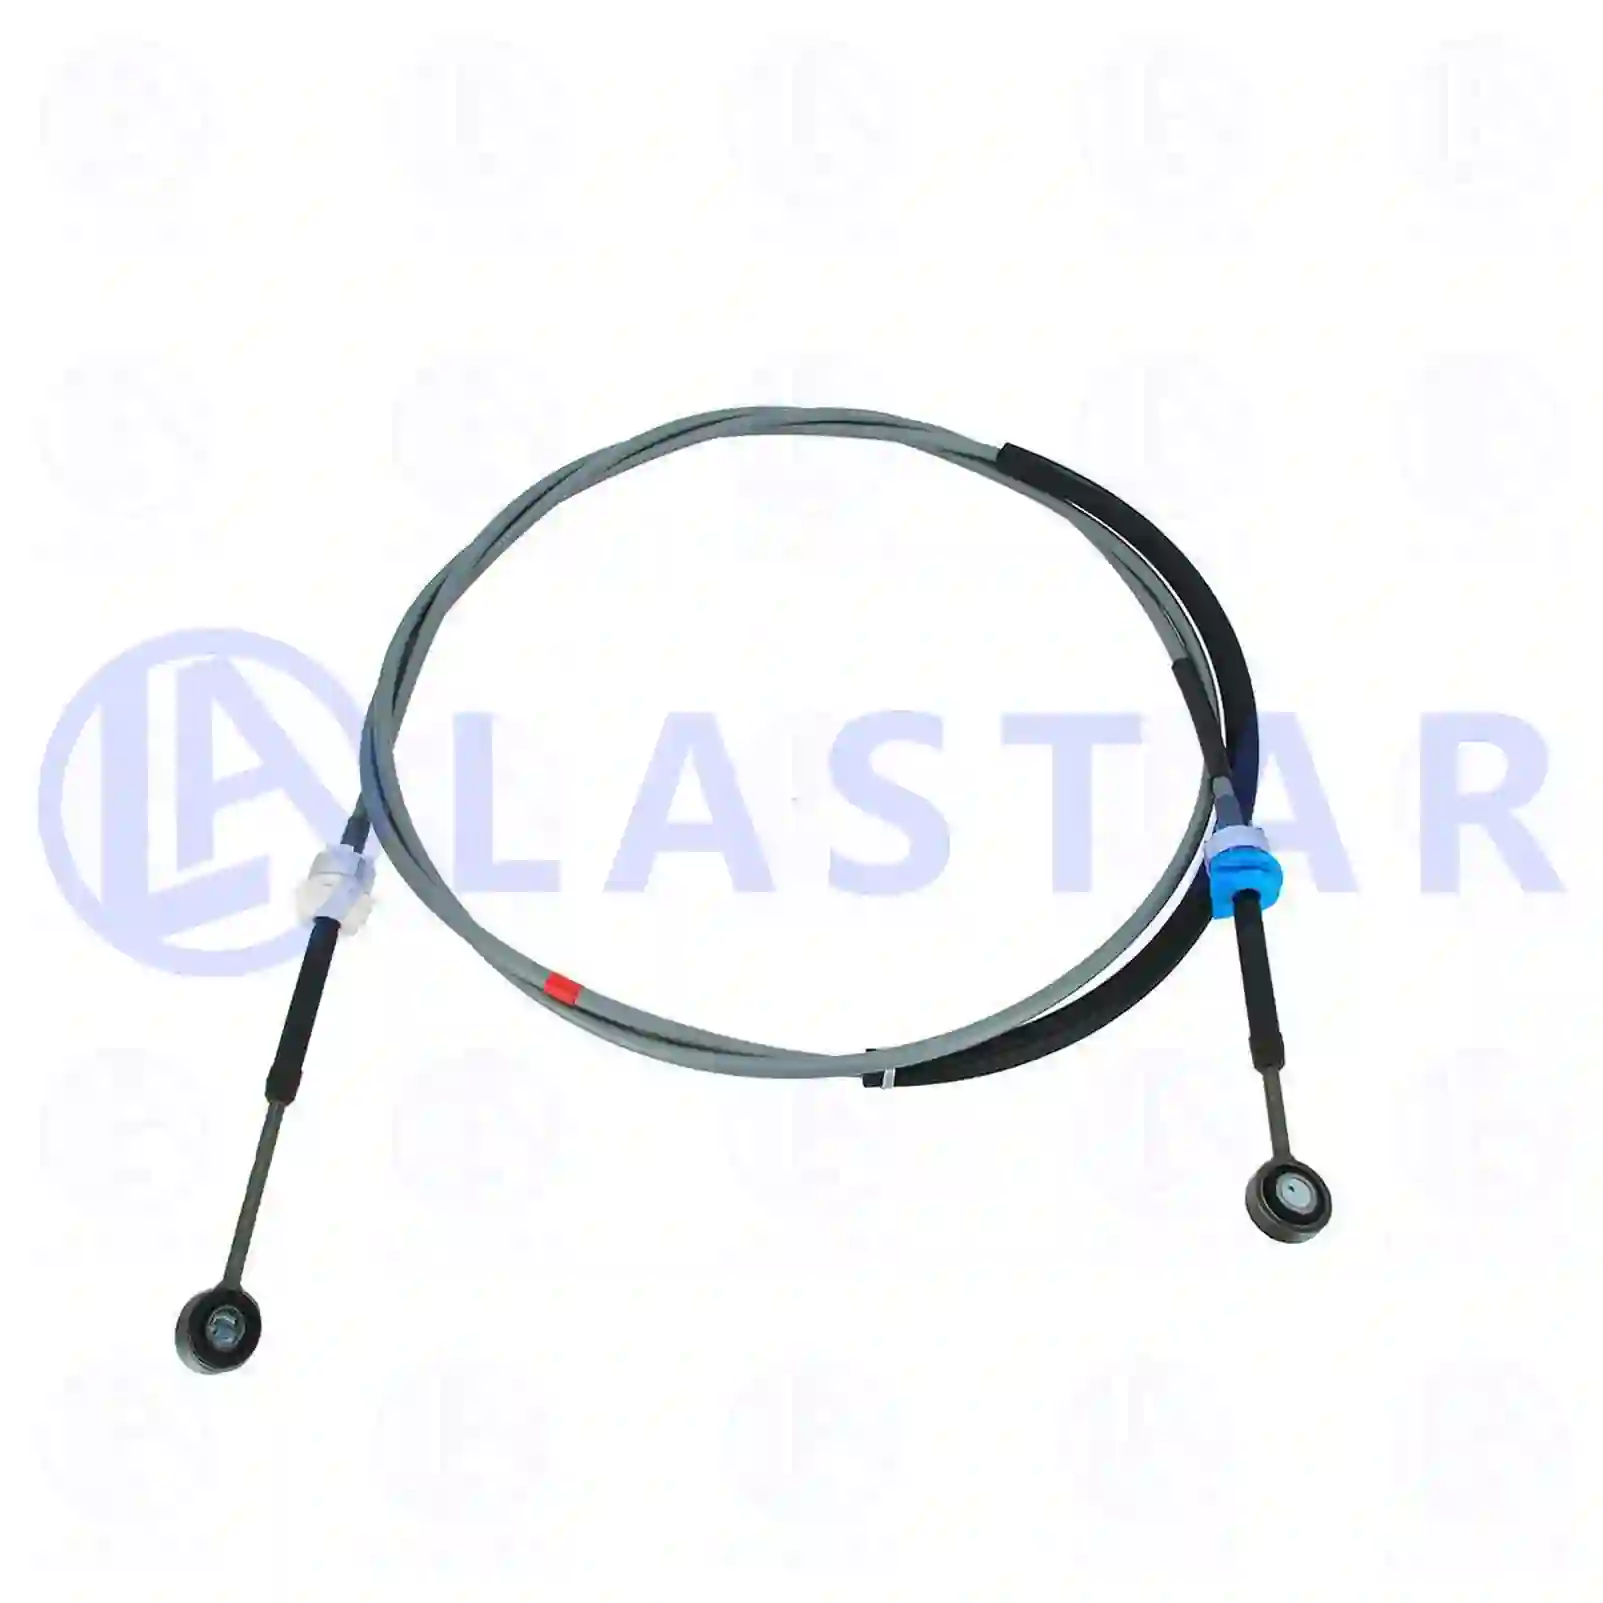 Control cable, switching, 77732696, 21343585, 2178971 ||  77732696 Lastar Spare Part | Truck Spare Parts, Auotomotive Spare Parts Control cable, switching, 77732696, 21343585, 2178971 ||  77732696 Lastar Spare Part | Truck Spare Parts, Auotomotive Spare Parts